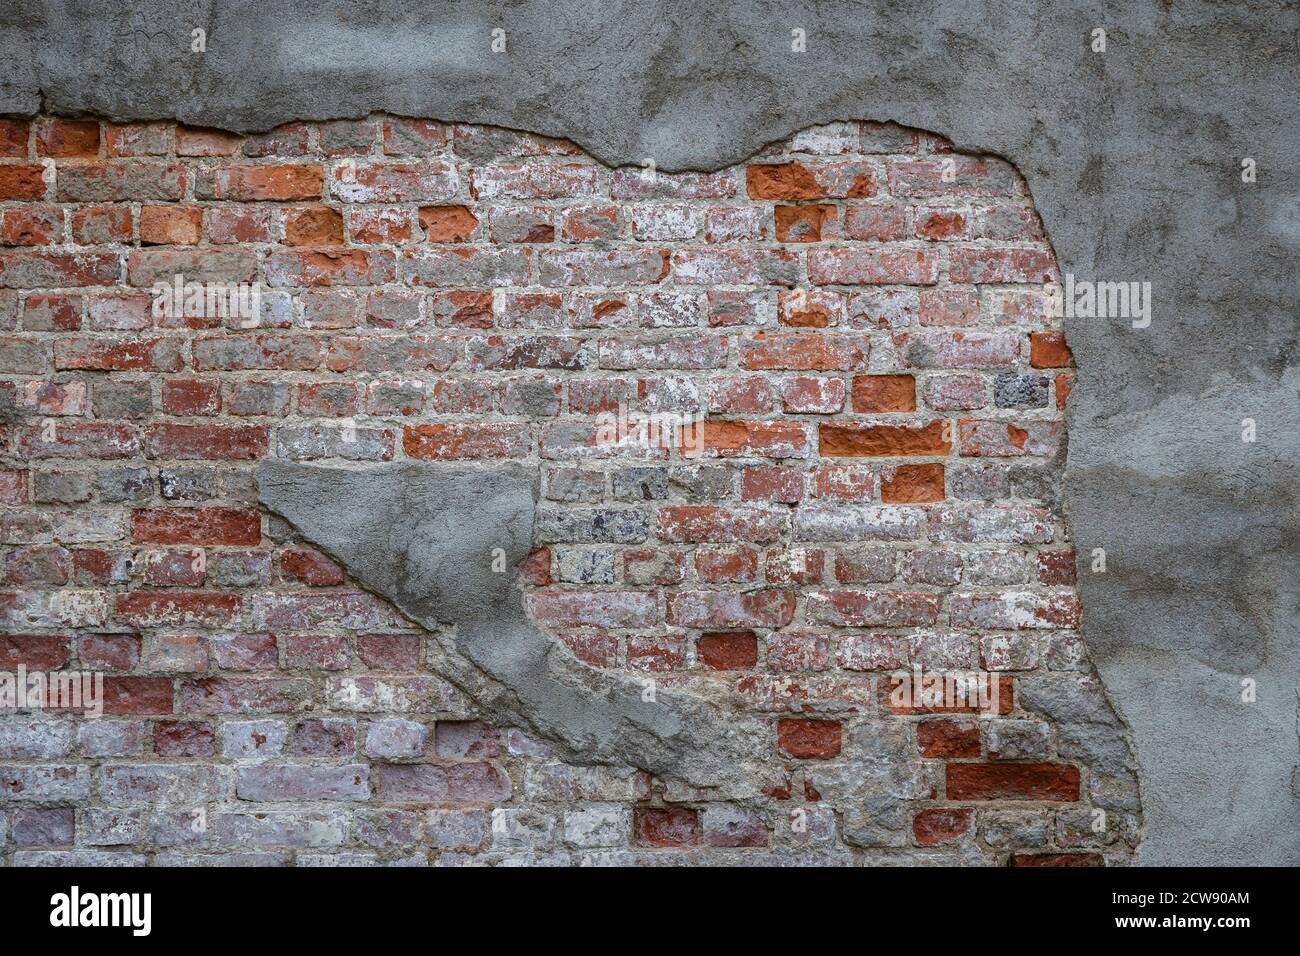 Front view of an old, dirty and weathered wall. Gray plastering is broken revealing old bricks. High resolution full frame textured background. Stock Photo